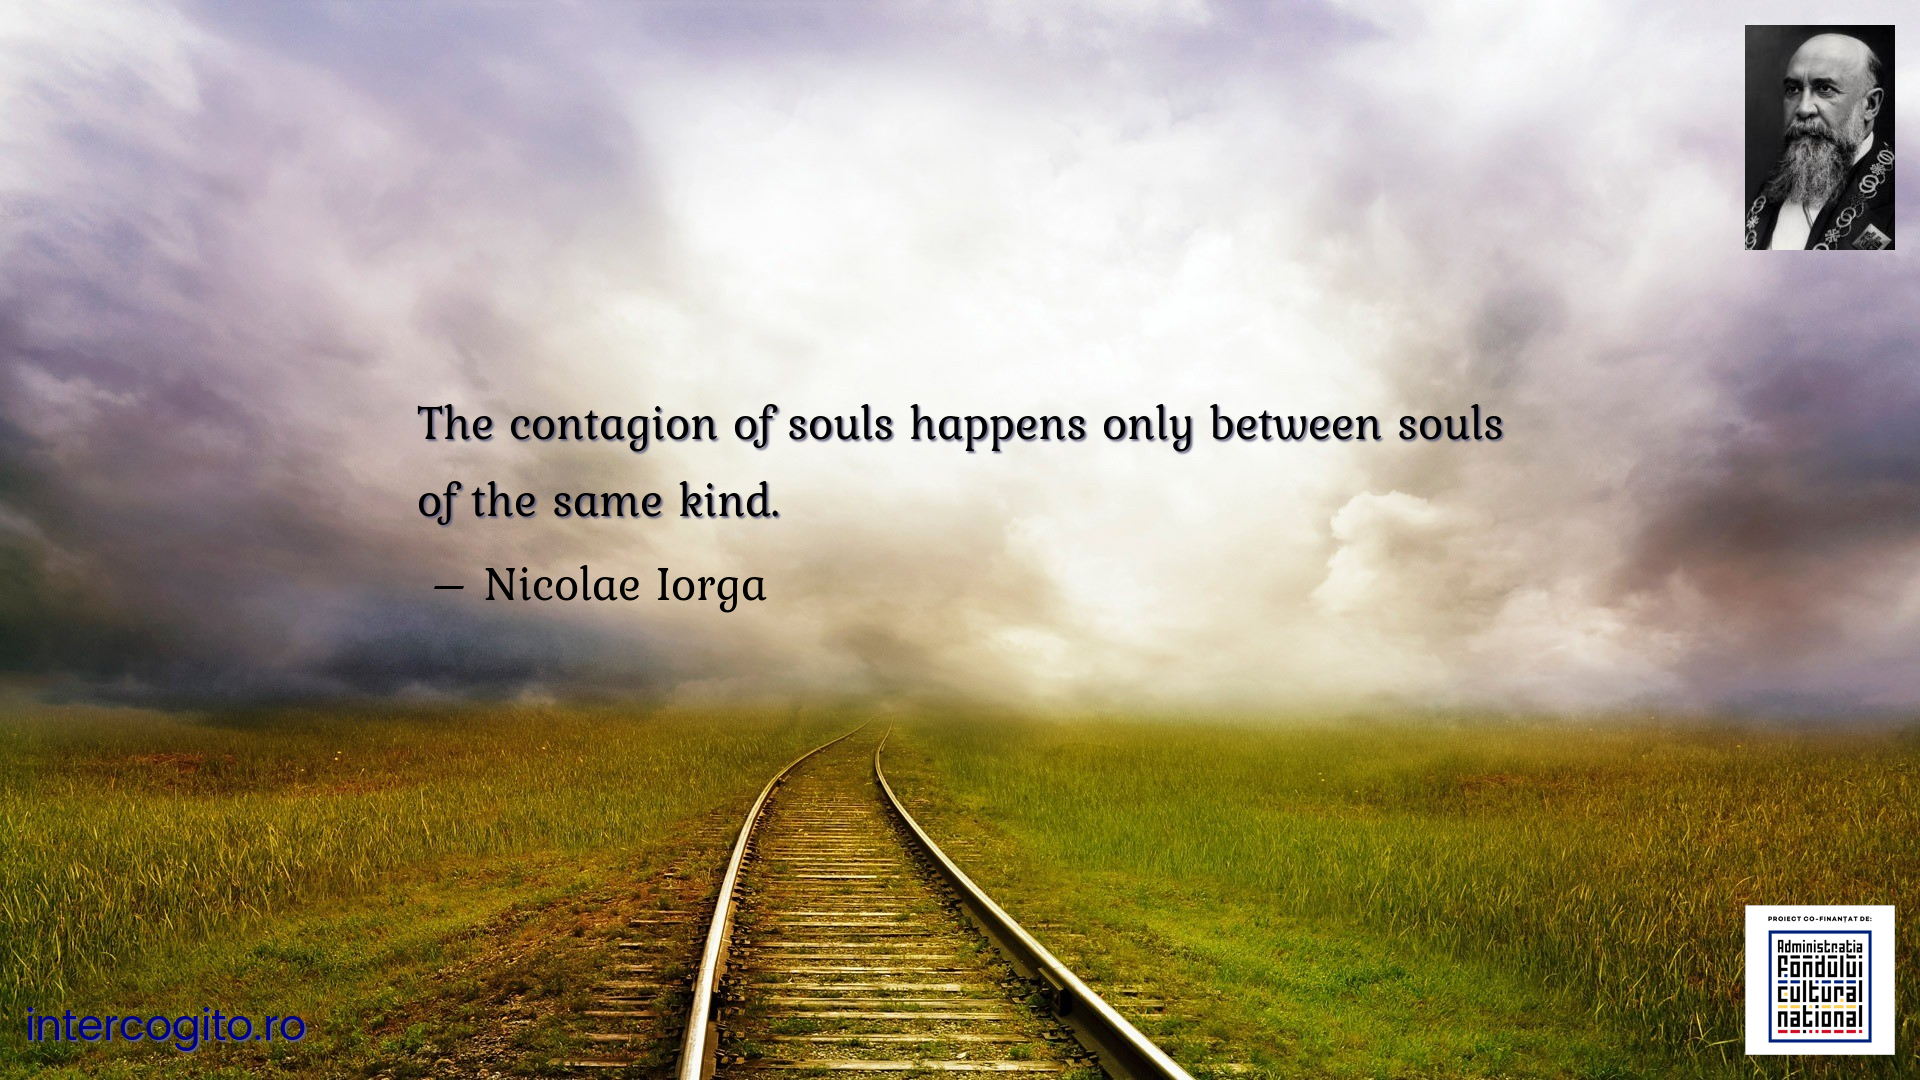 The contagion of souls happens only between souls of the same kind.